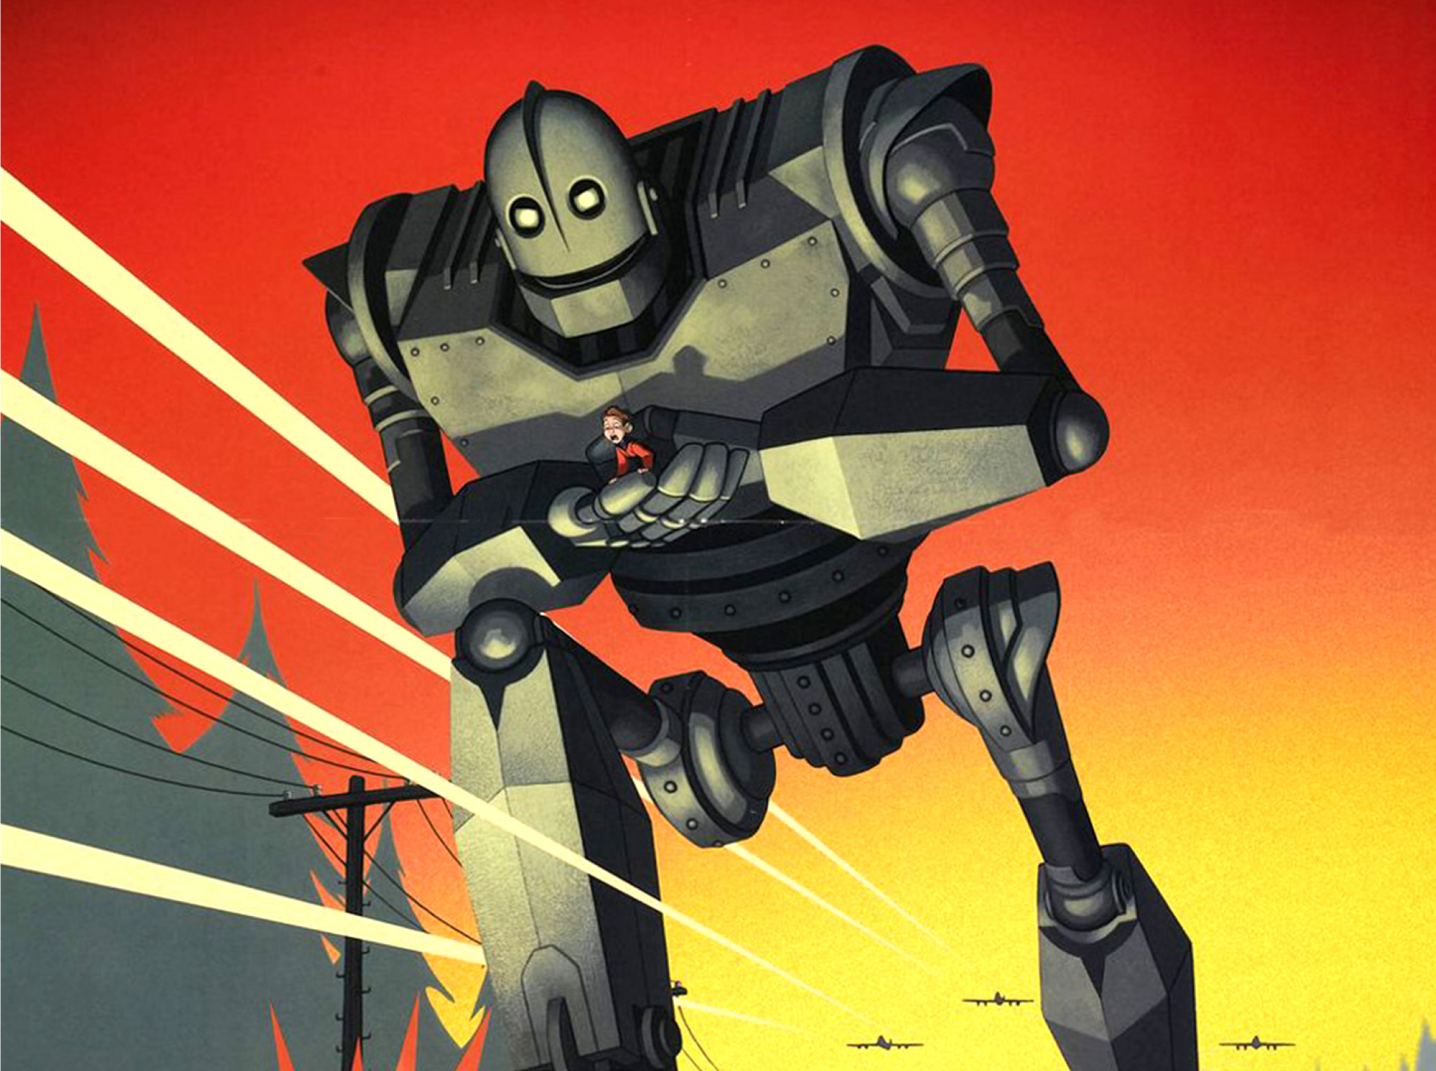 Still from the Iron Giant